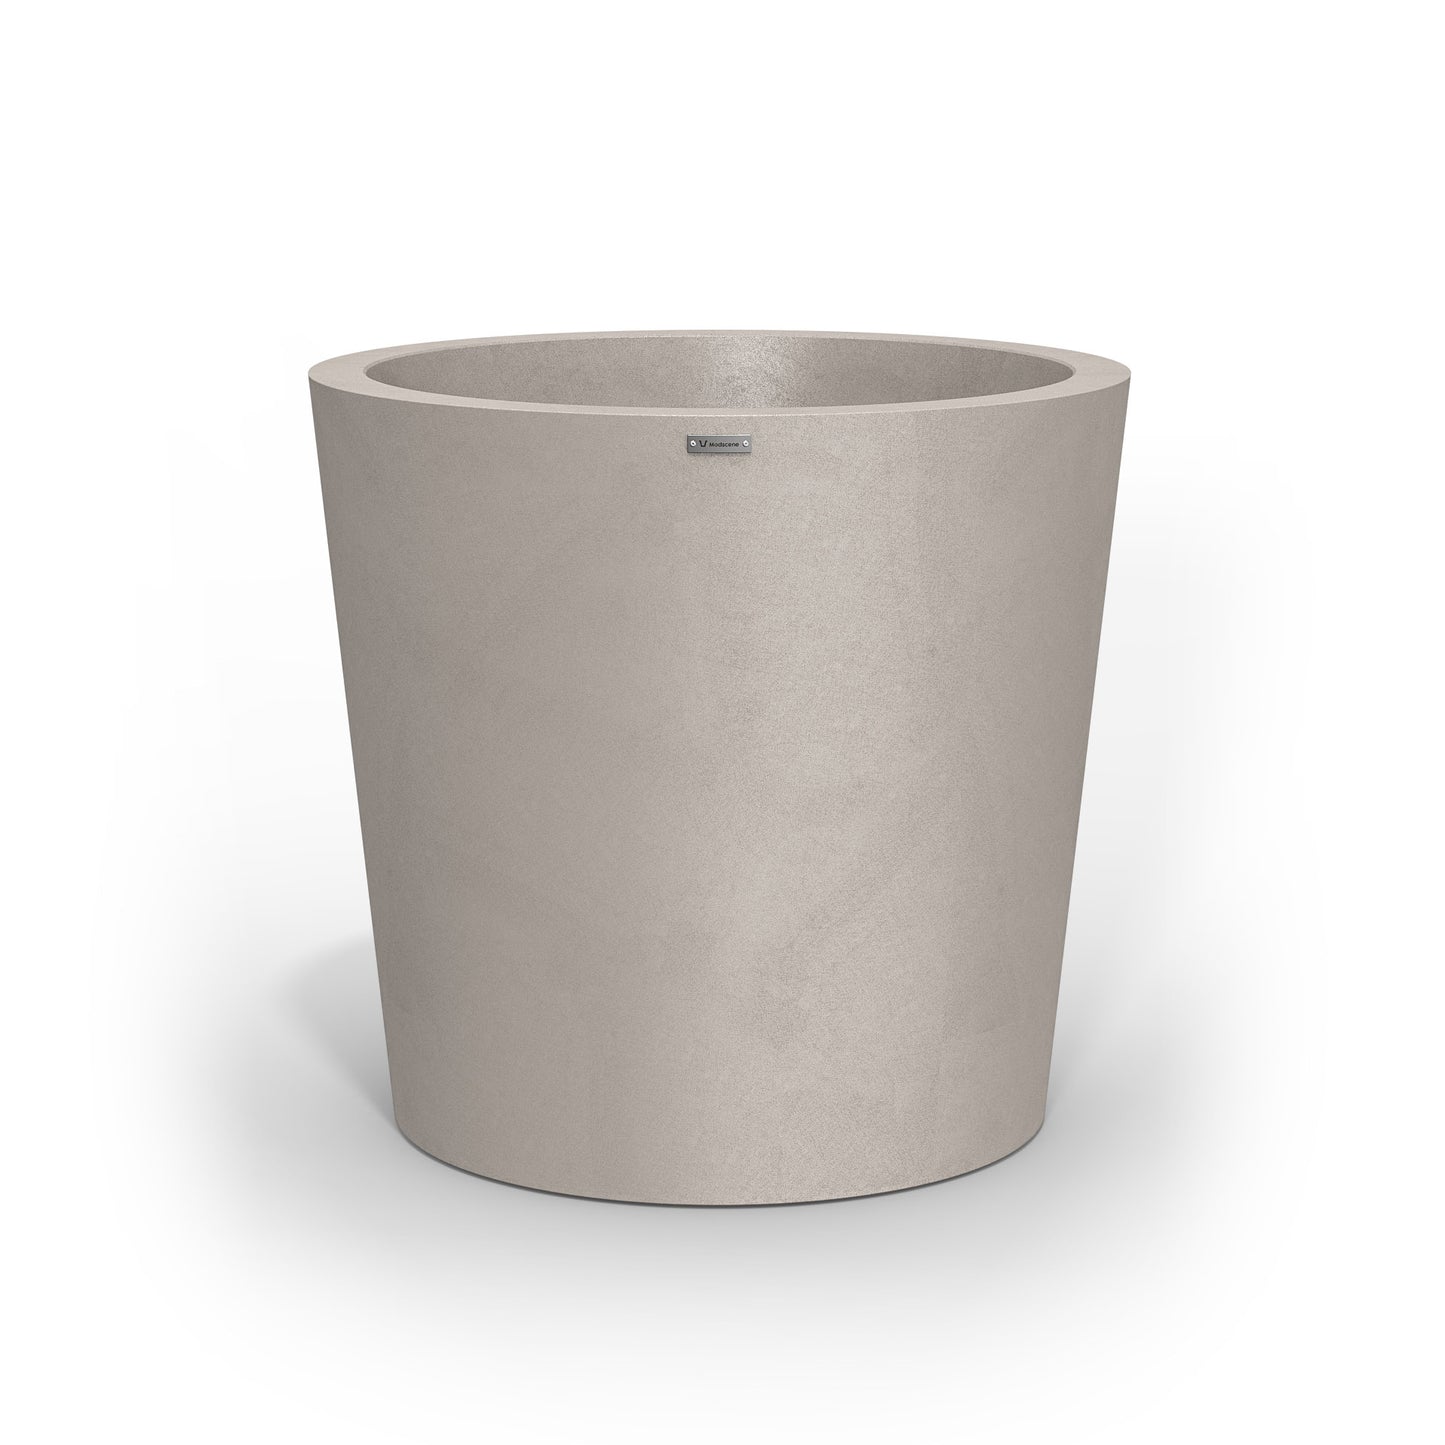 A large Modscene pot planter in a sand stone colour with a concrete look finish.